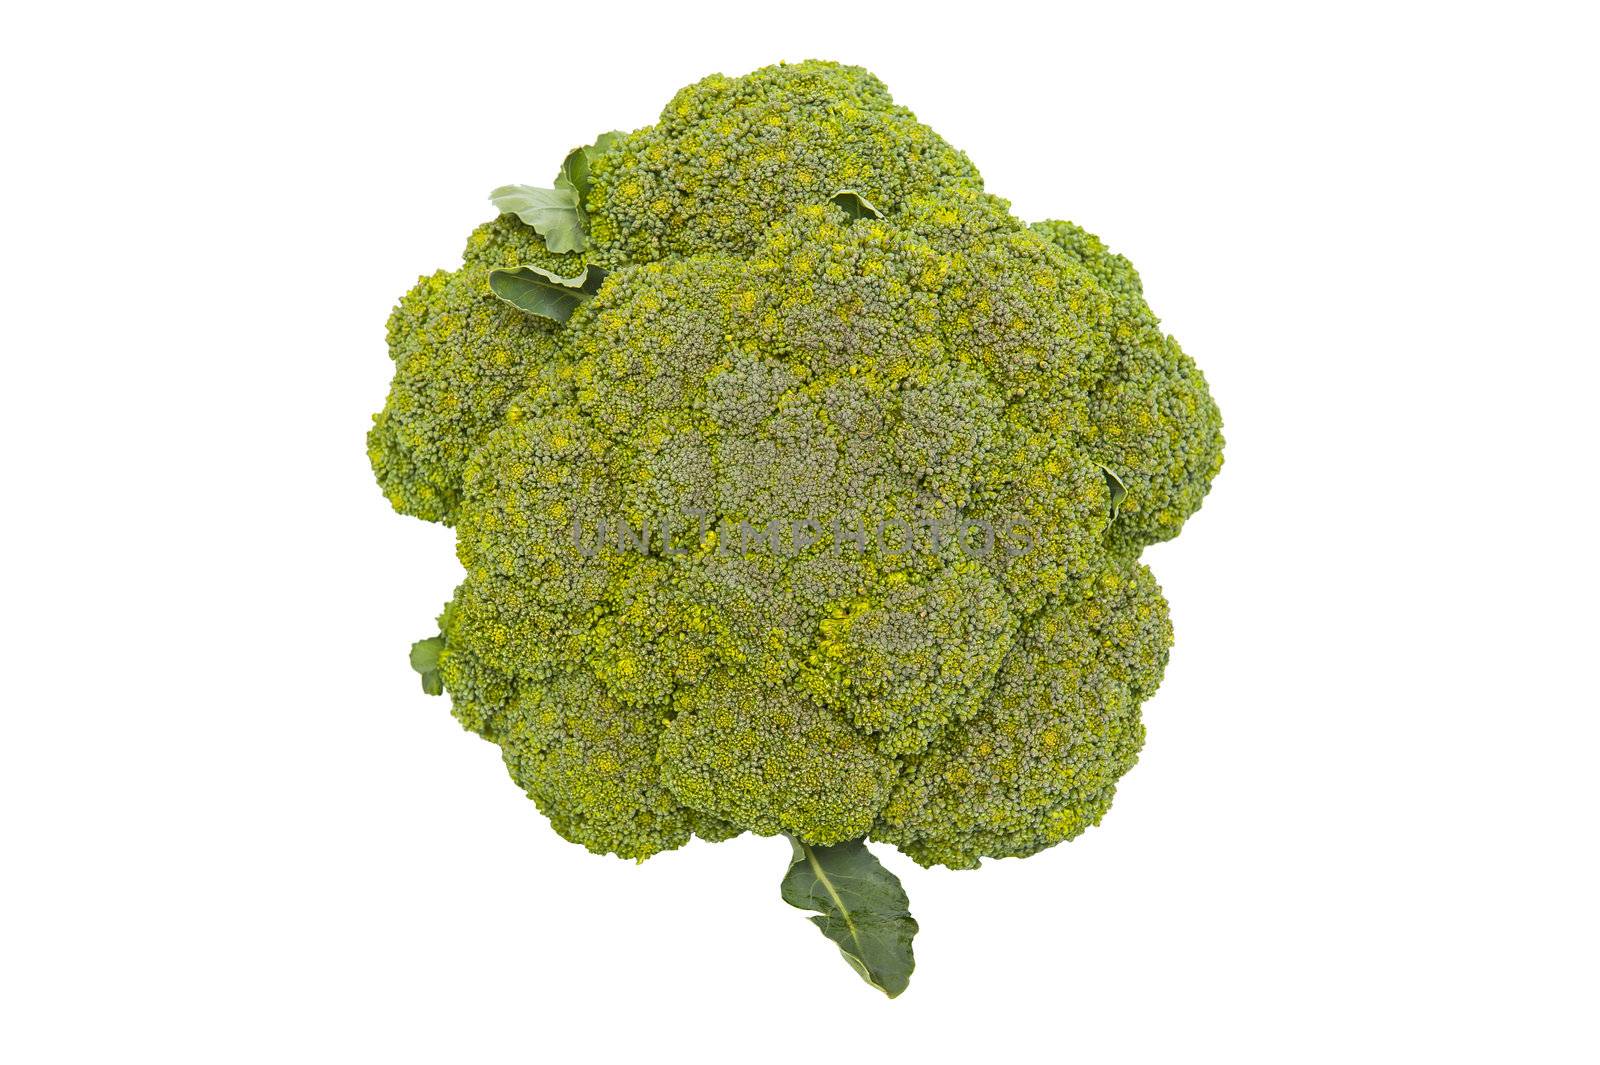 Broccoli isolated on the white background